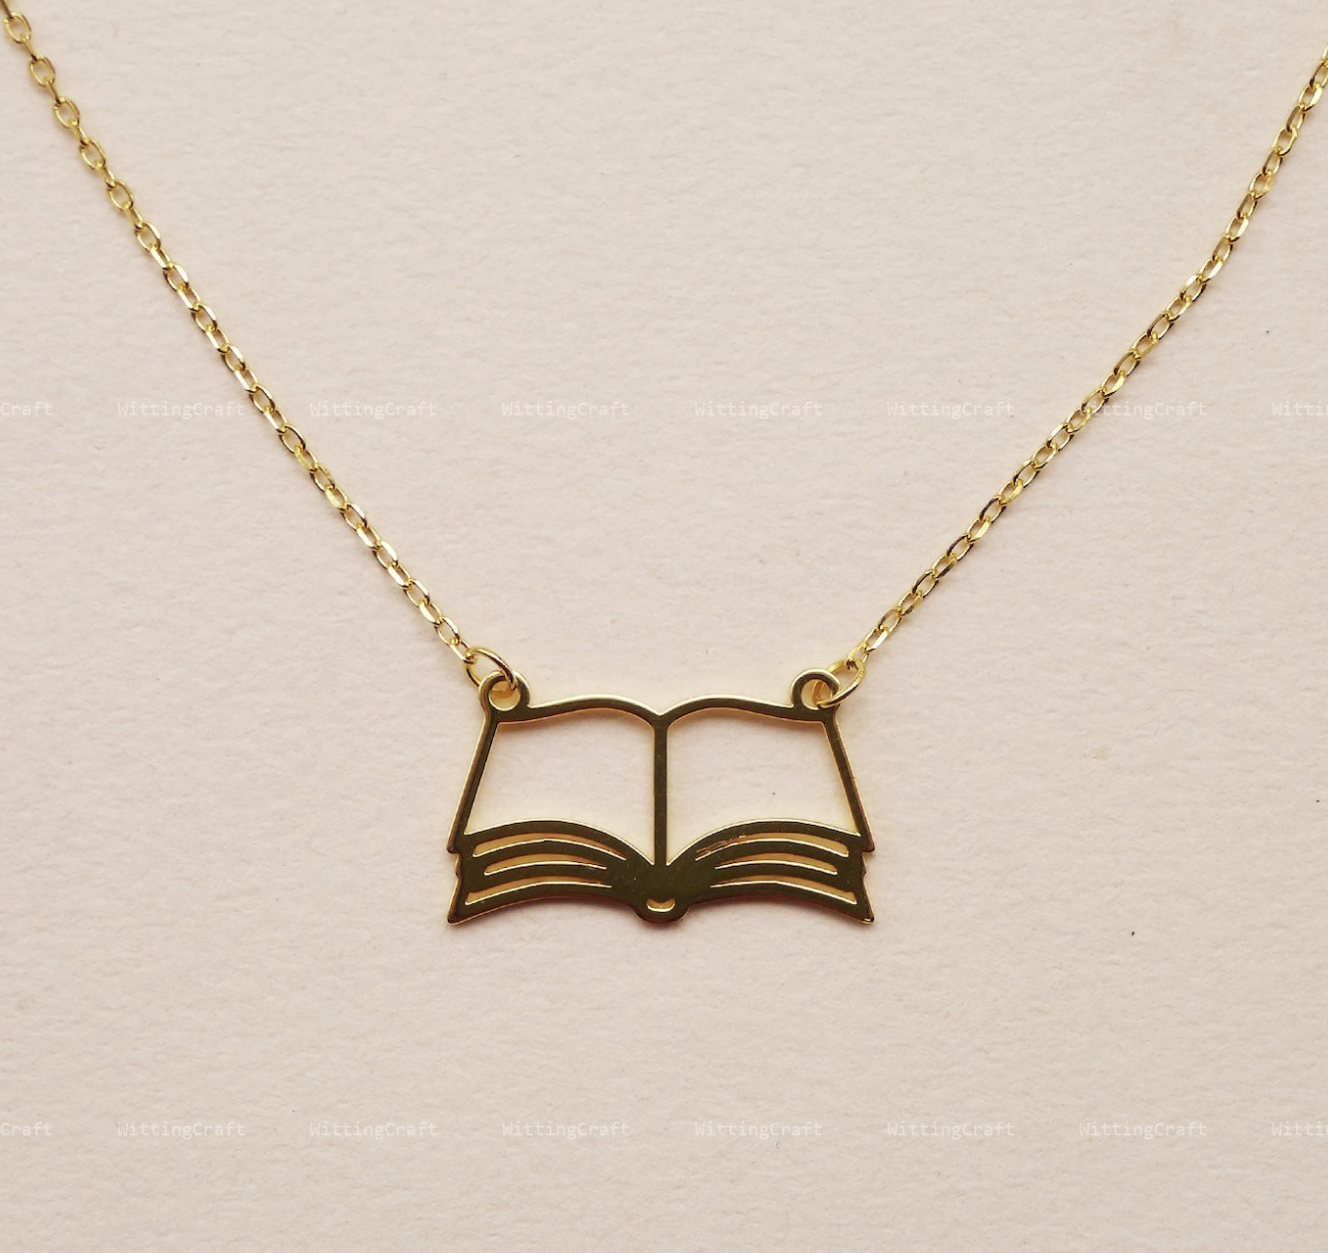 Gold necklace featuring the outline of an open book